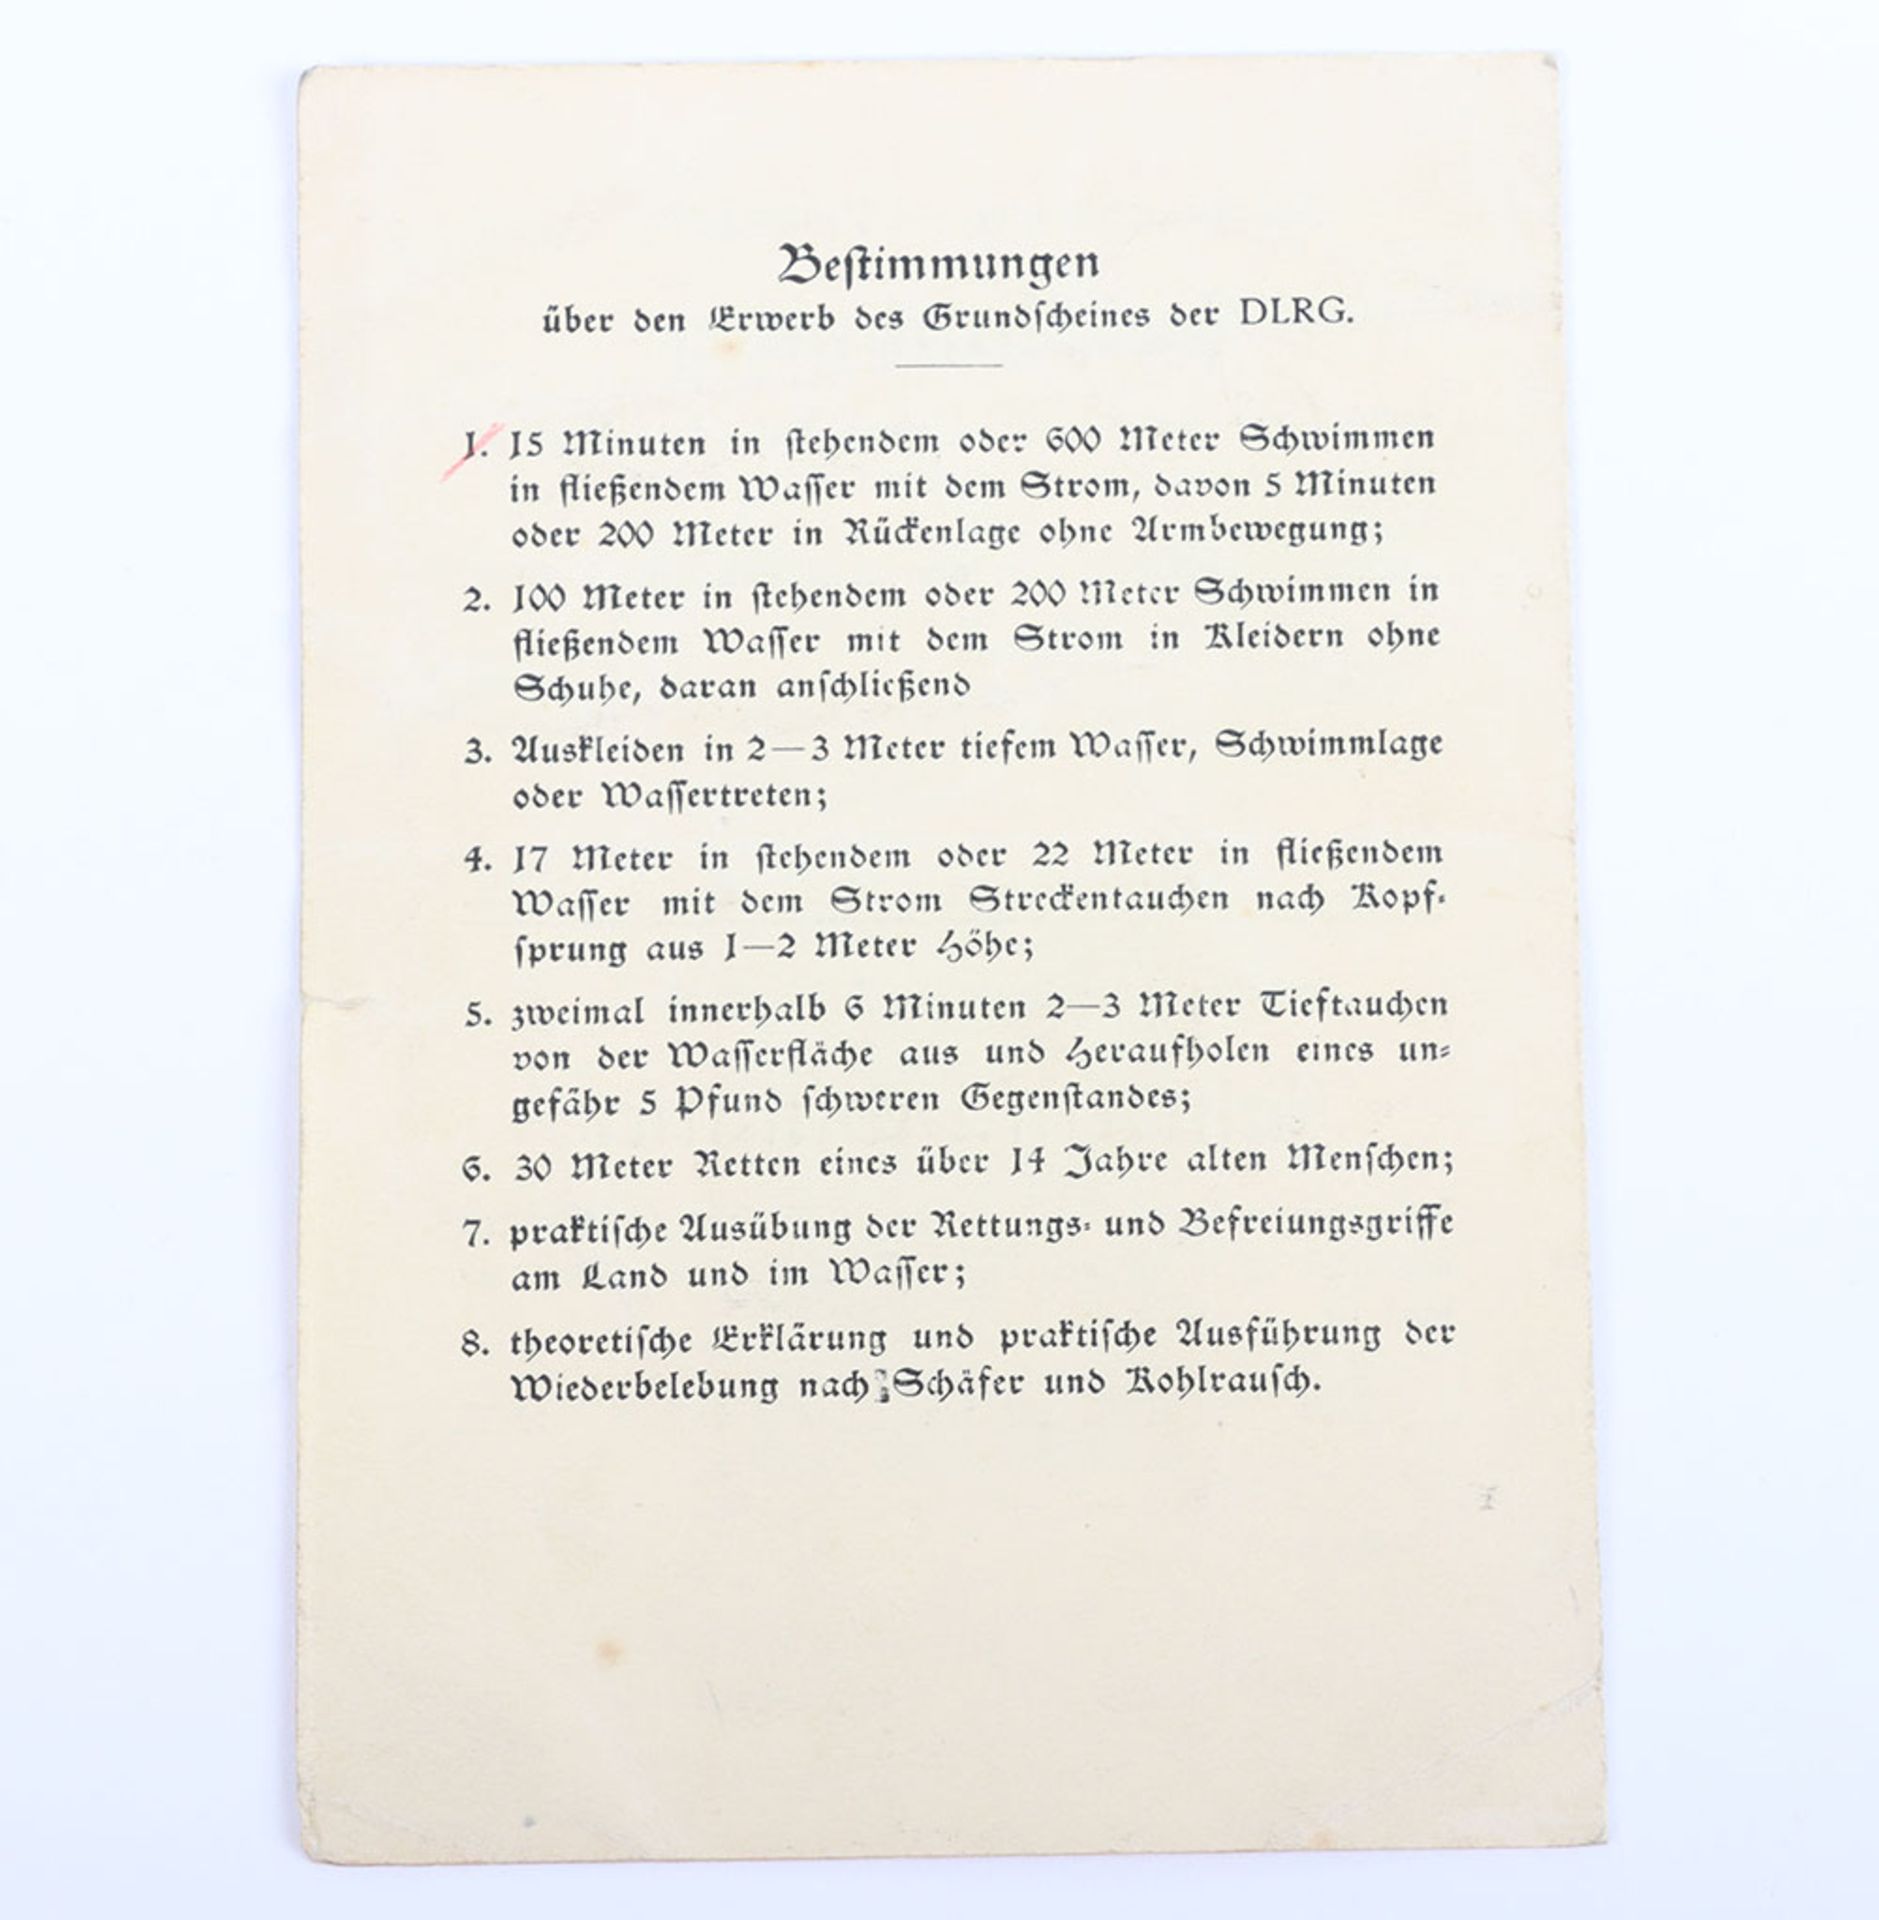 WW2 German Armed Forces Wehrpass Issued in April 1945 - Image 7 of 37